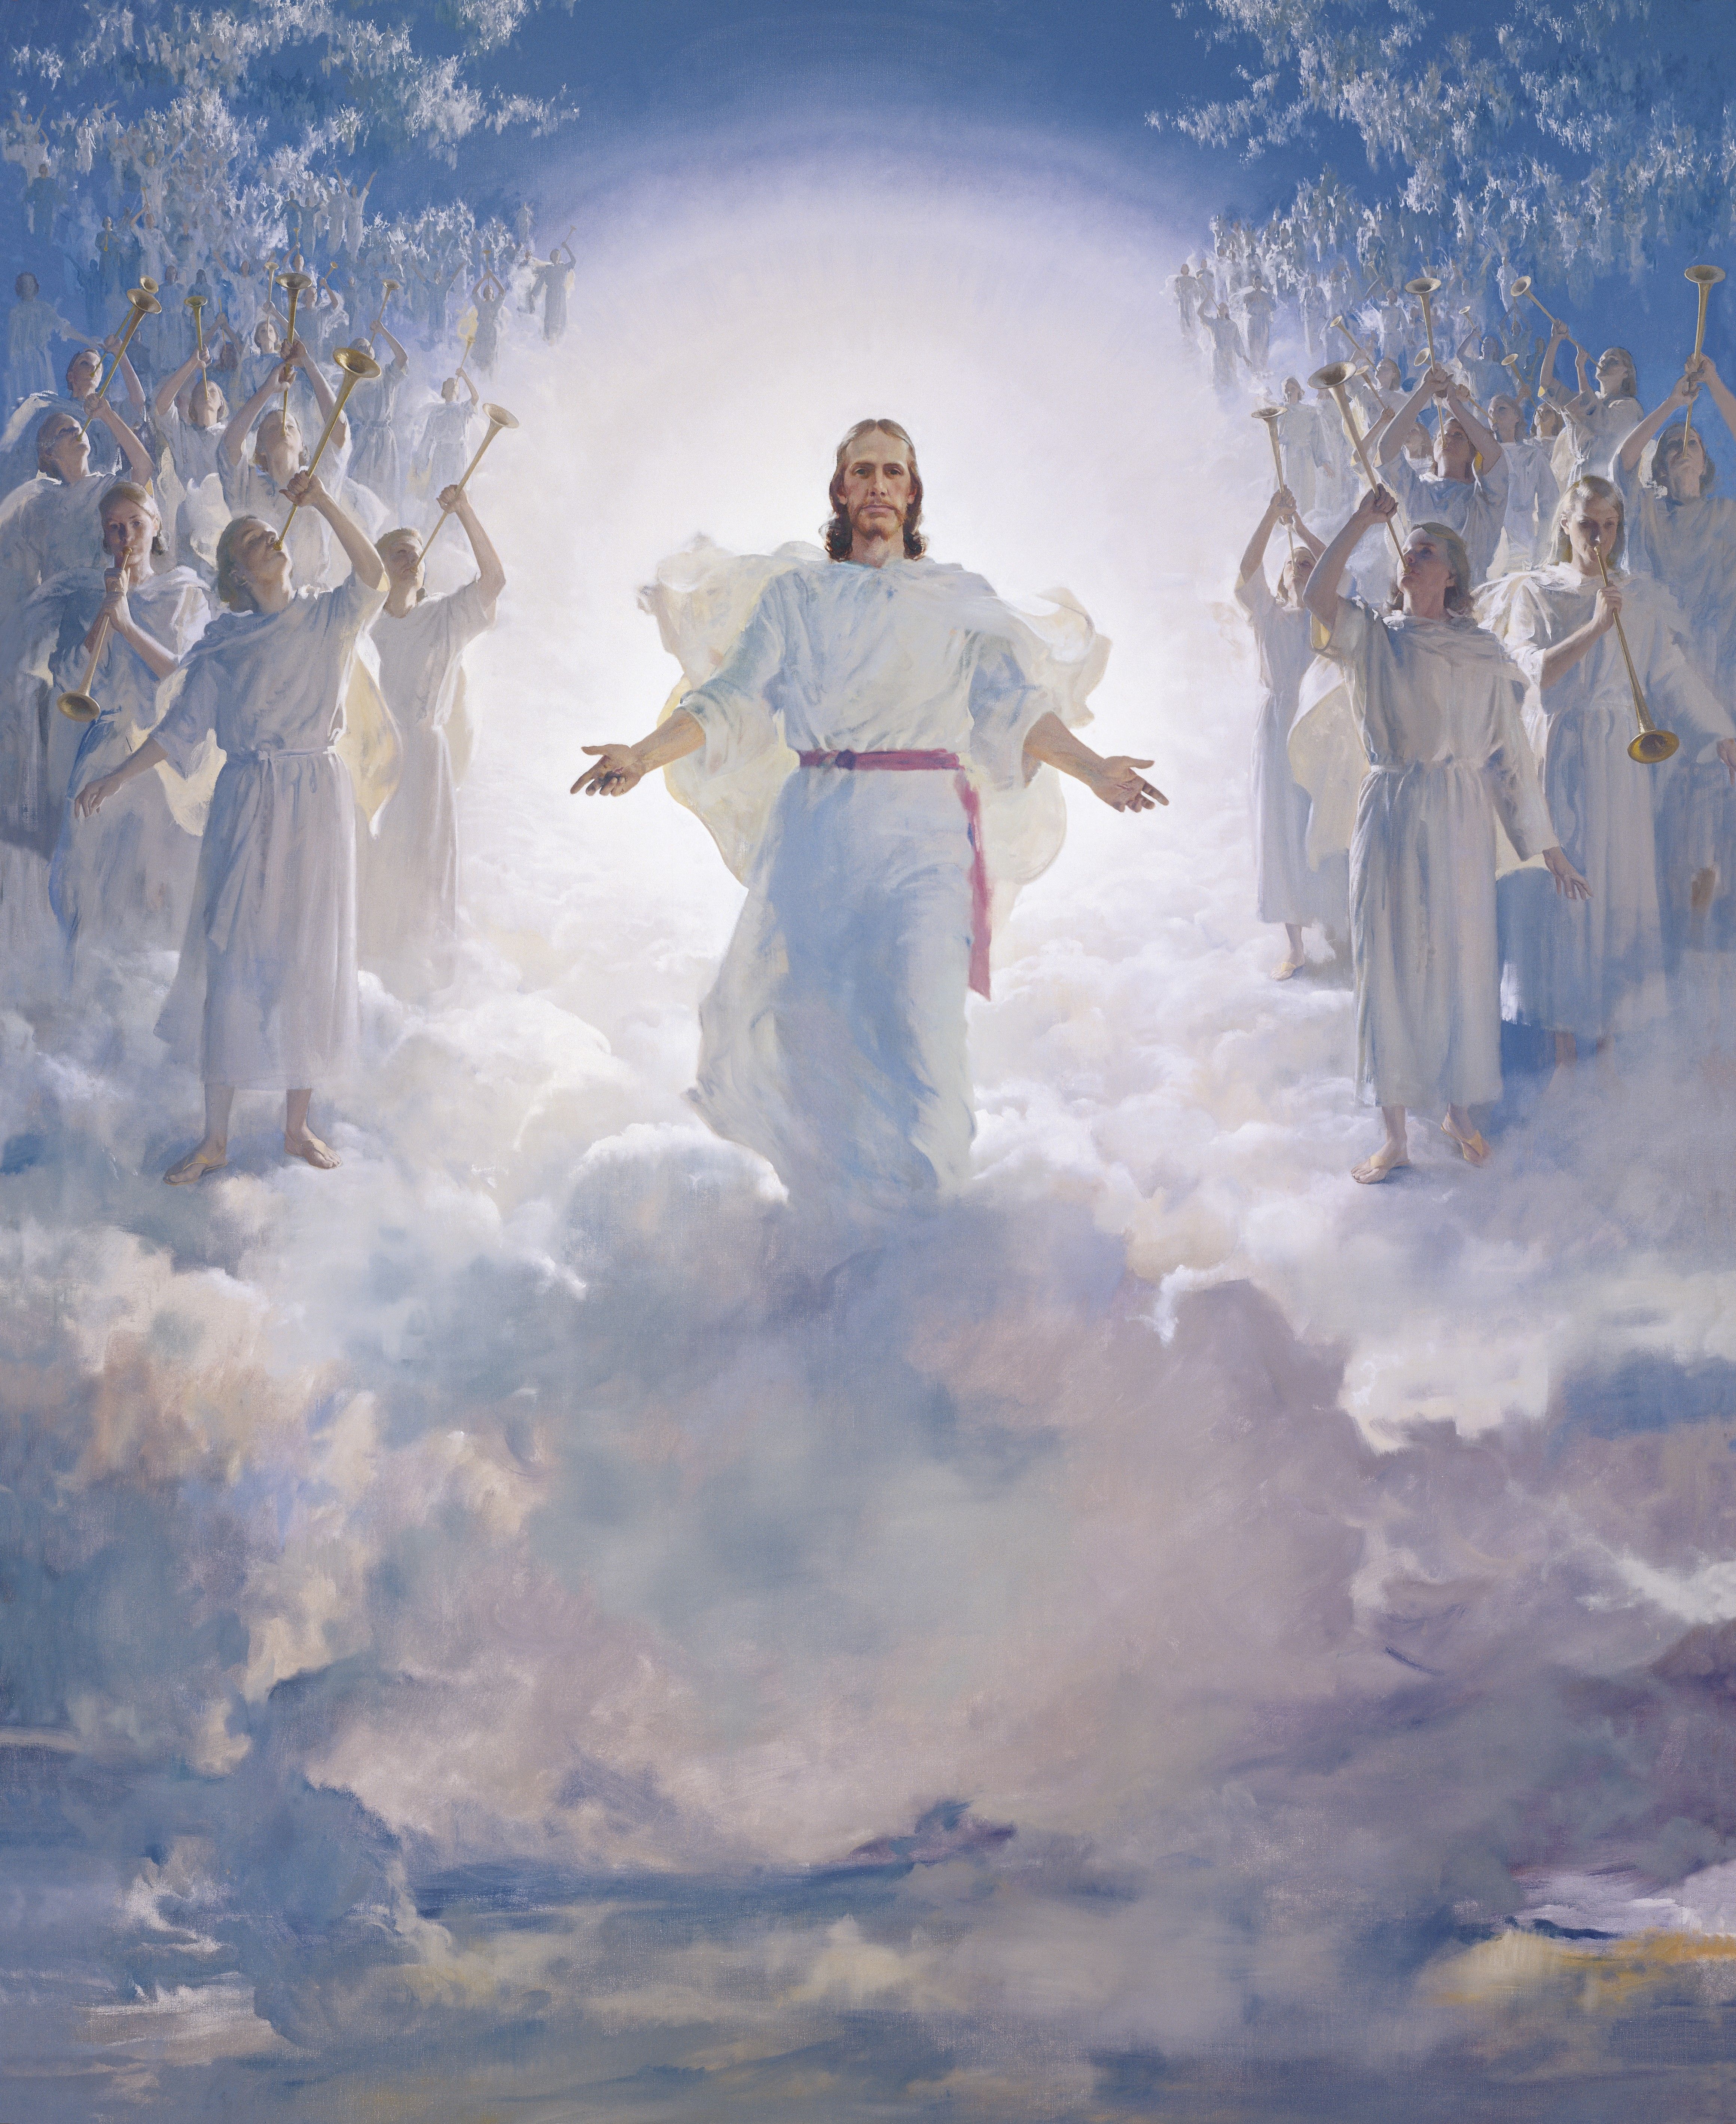 The Second Coming, by Harry Anderson (62562); GAK 238; GAB 66; Primary manual 5-28; Primary manual 6-28; Primary manual 7-25; Matthew 16:27; 24:30–31; 25:31